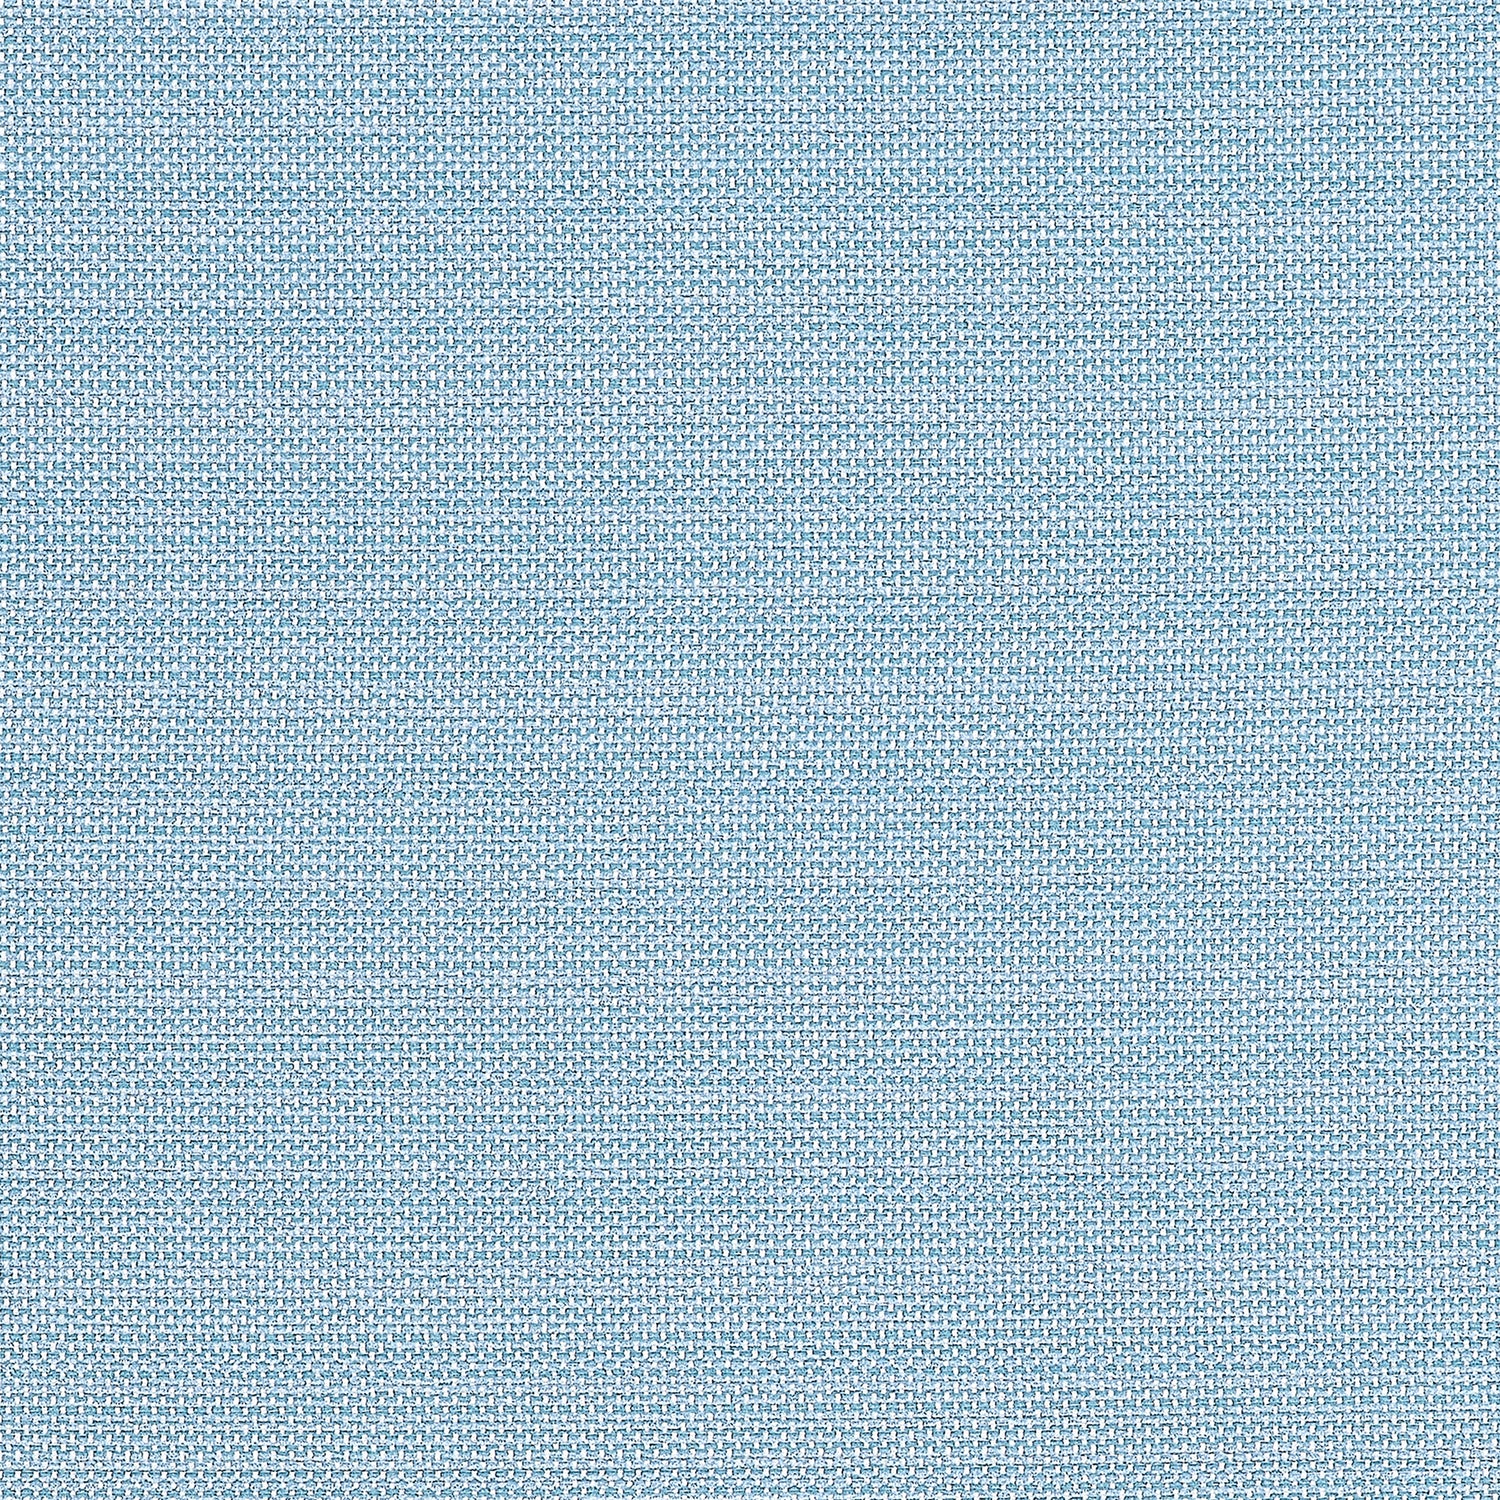 Cameron fabric in sky color - pattern number W81648 - by Thibaut in the Locale collection